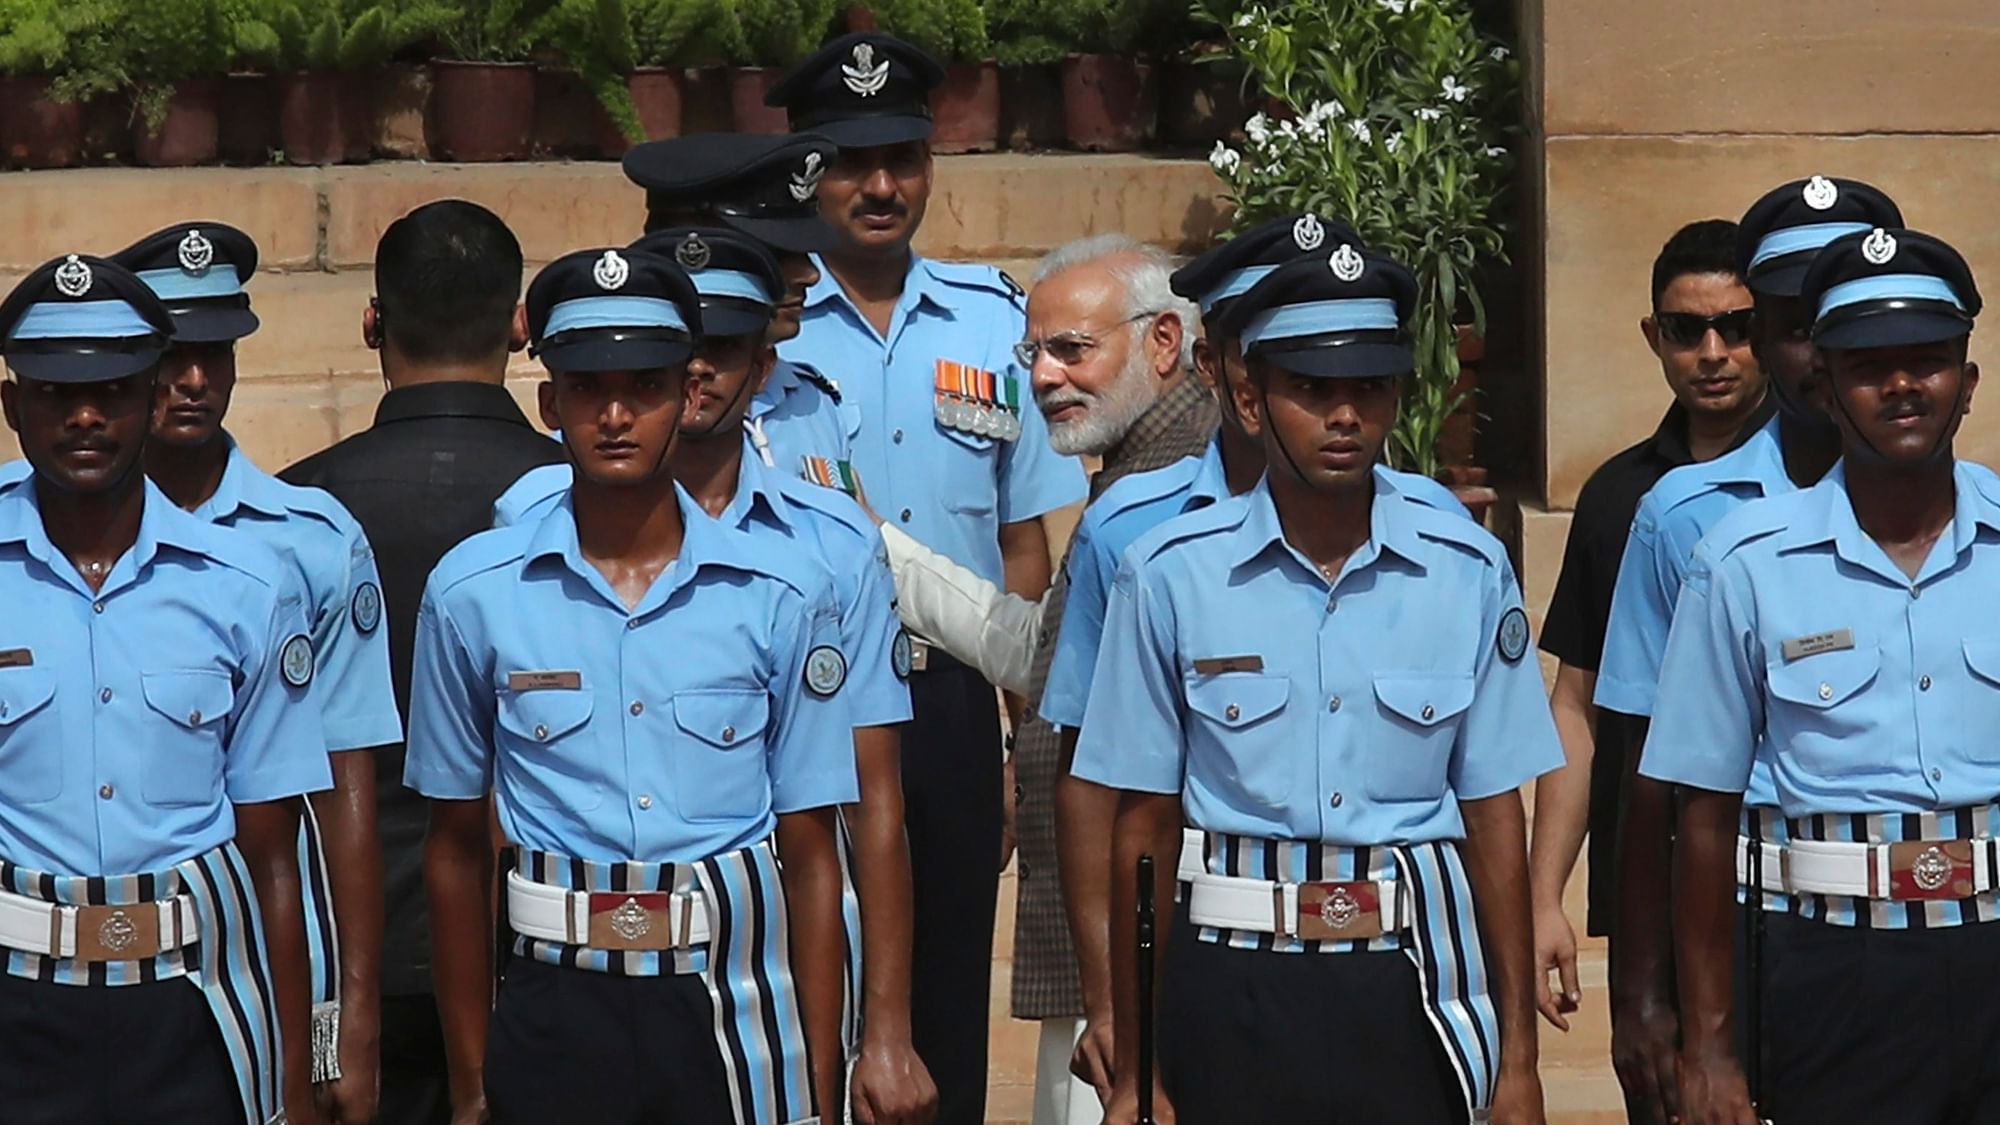 Prime Minister Narendra Modi, centre, talks to an Indian Air Force officer who collapsed while standing to offer guard of honour to visiting Seychelles President Danny Antoine Rollen Faure.